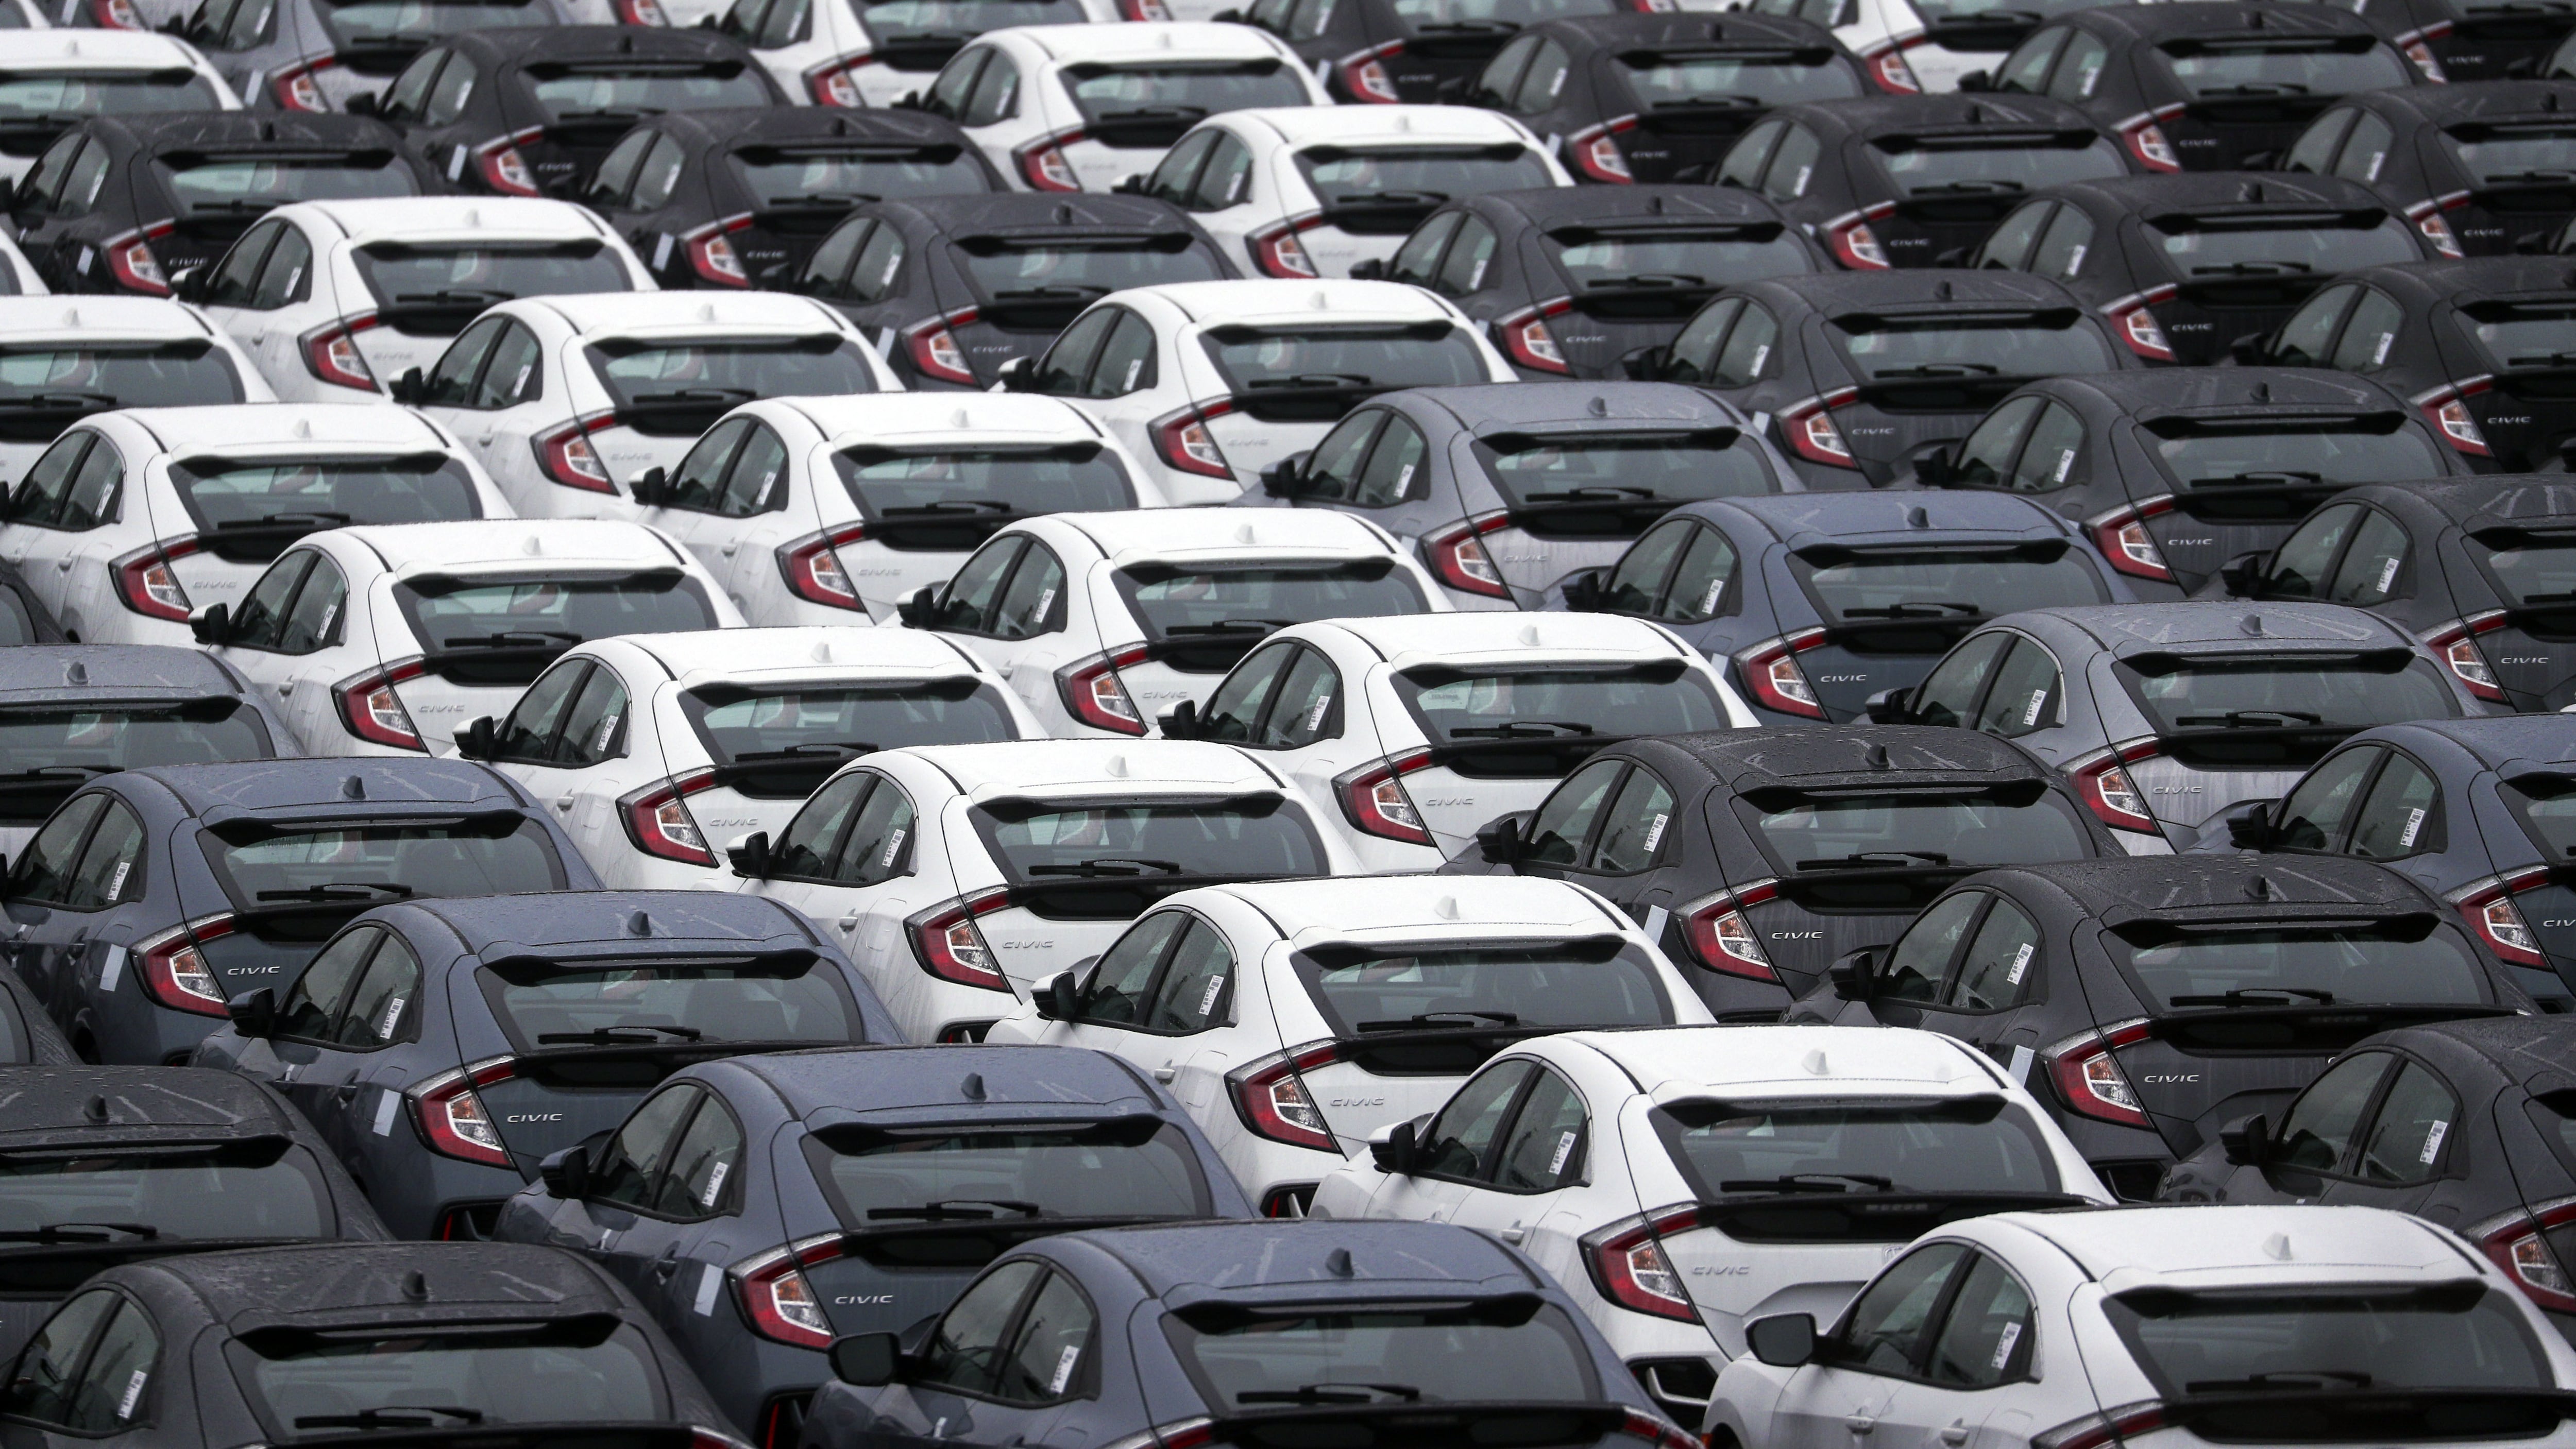 Purchases of new cars by private buyers declined in June compared with the same month last year, preliminary figures show